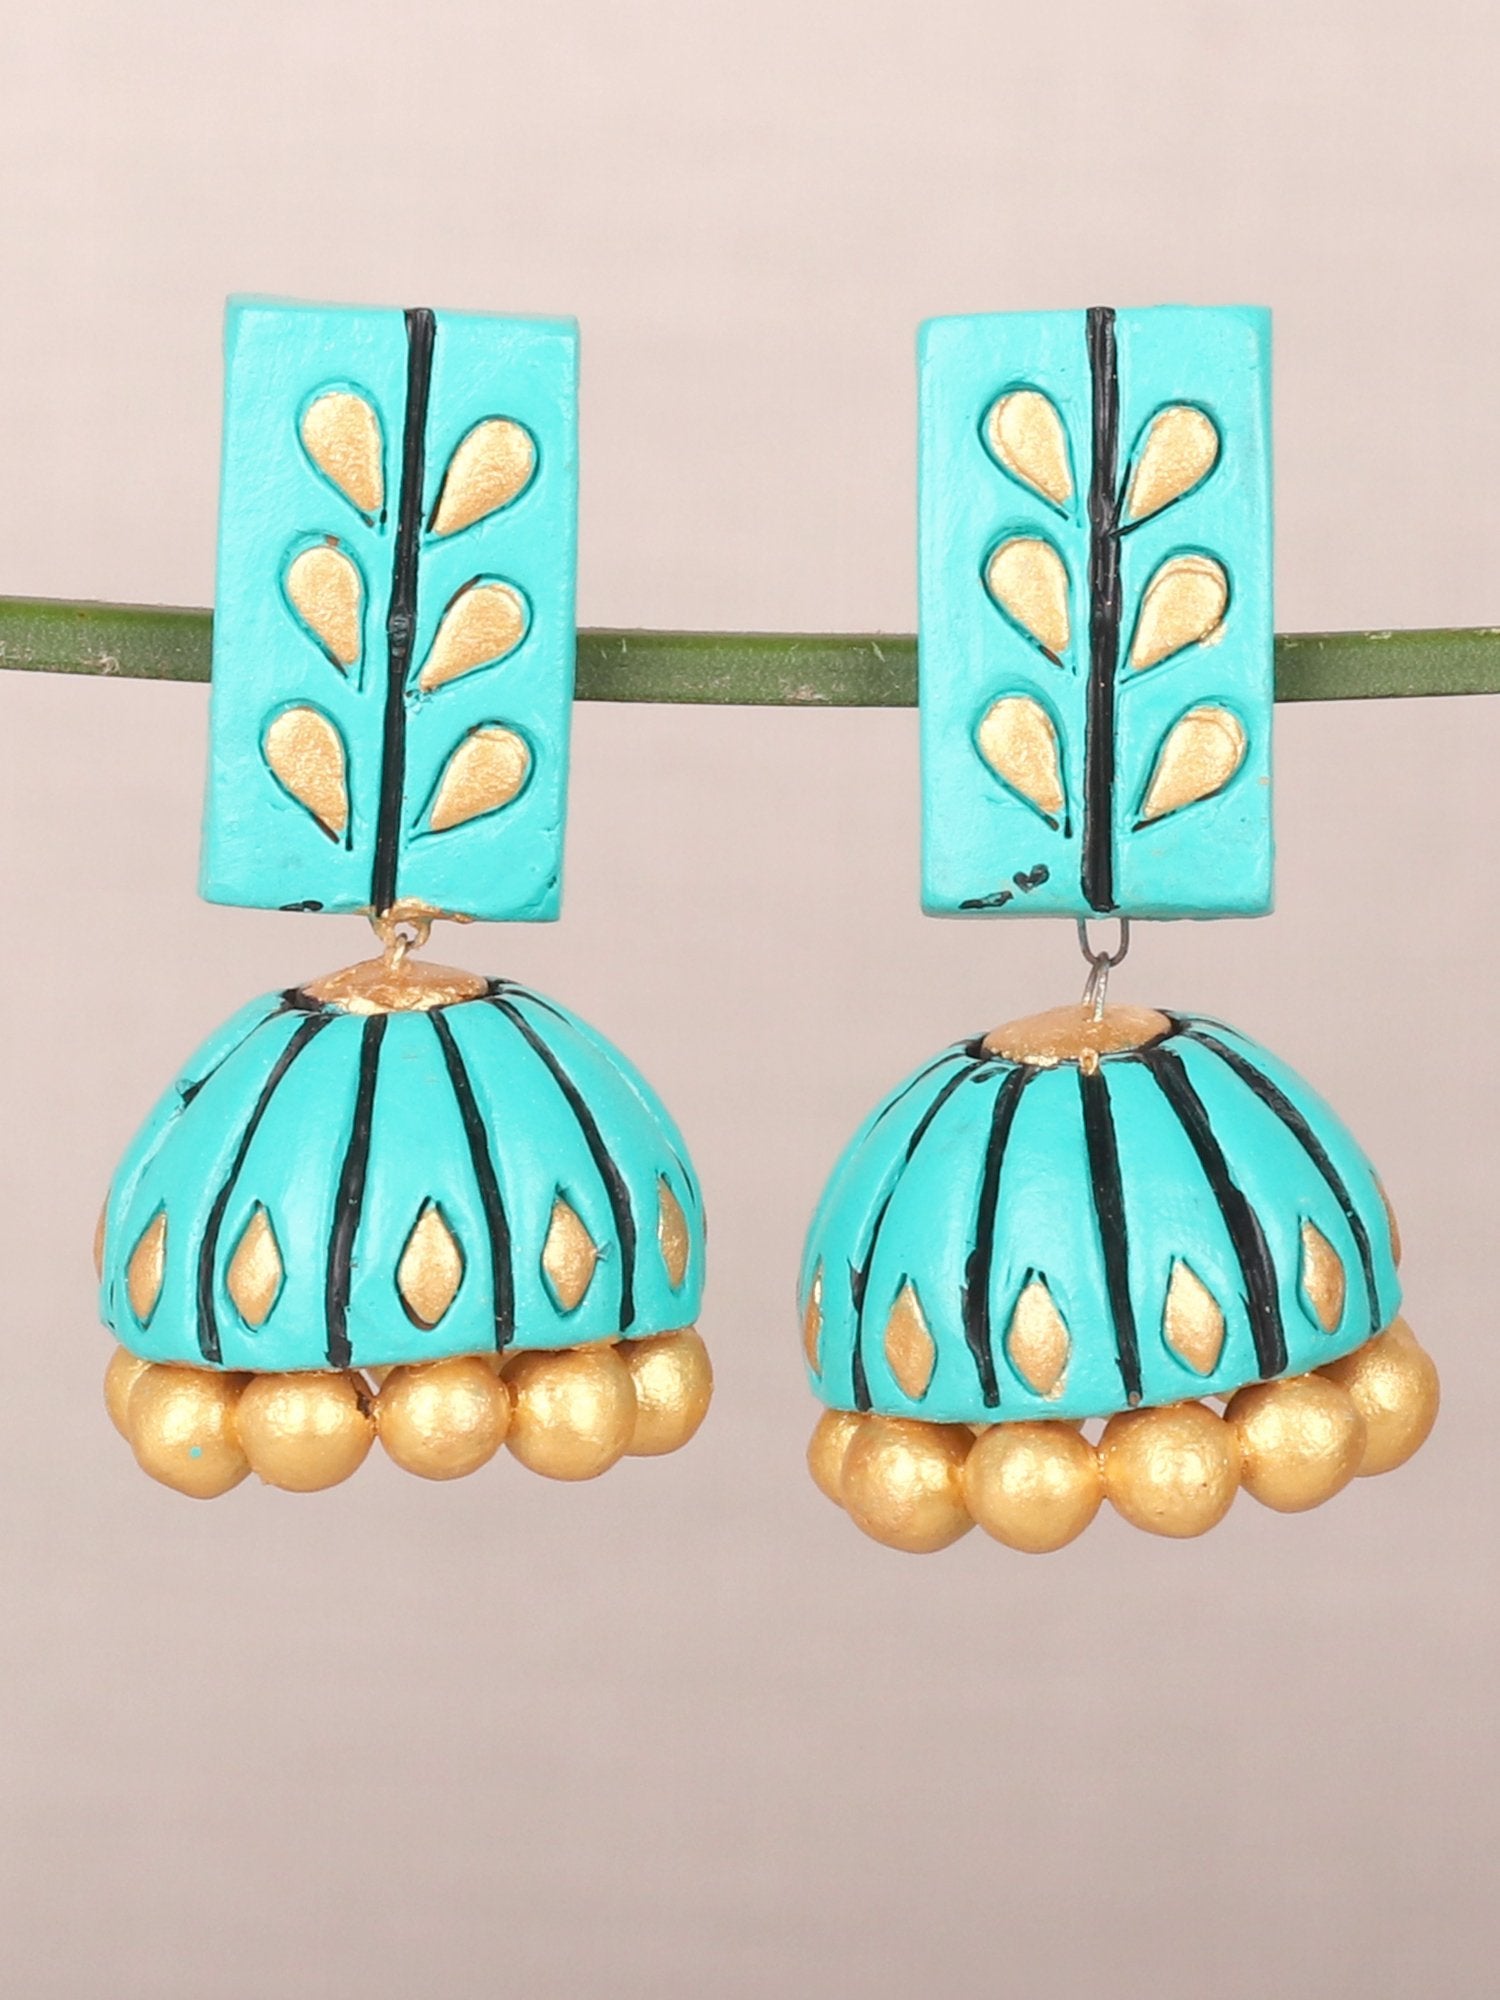 Stylish Turquoise Elongated Dome Shaped Earrings - A Local Tribe